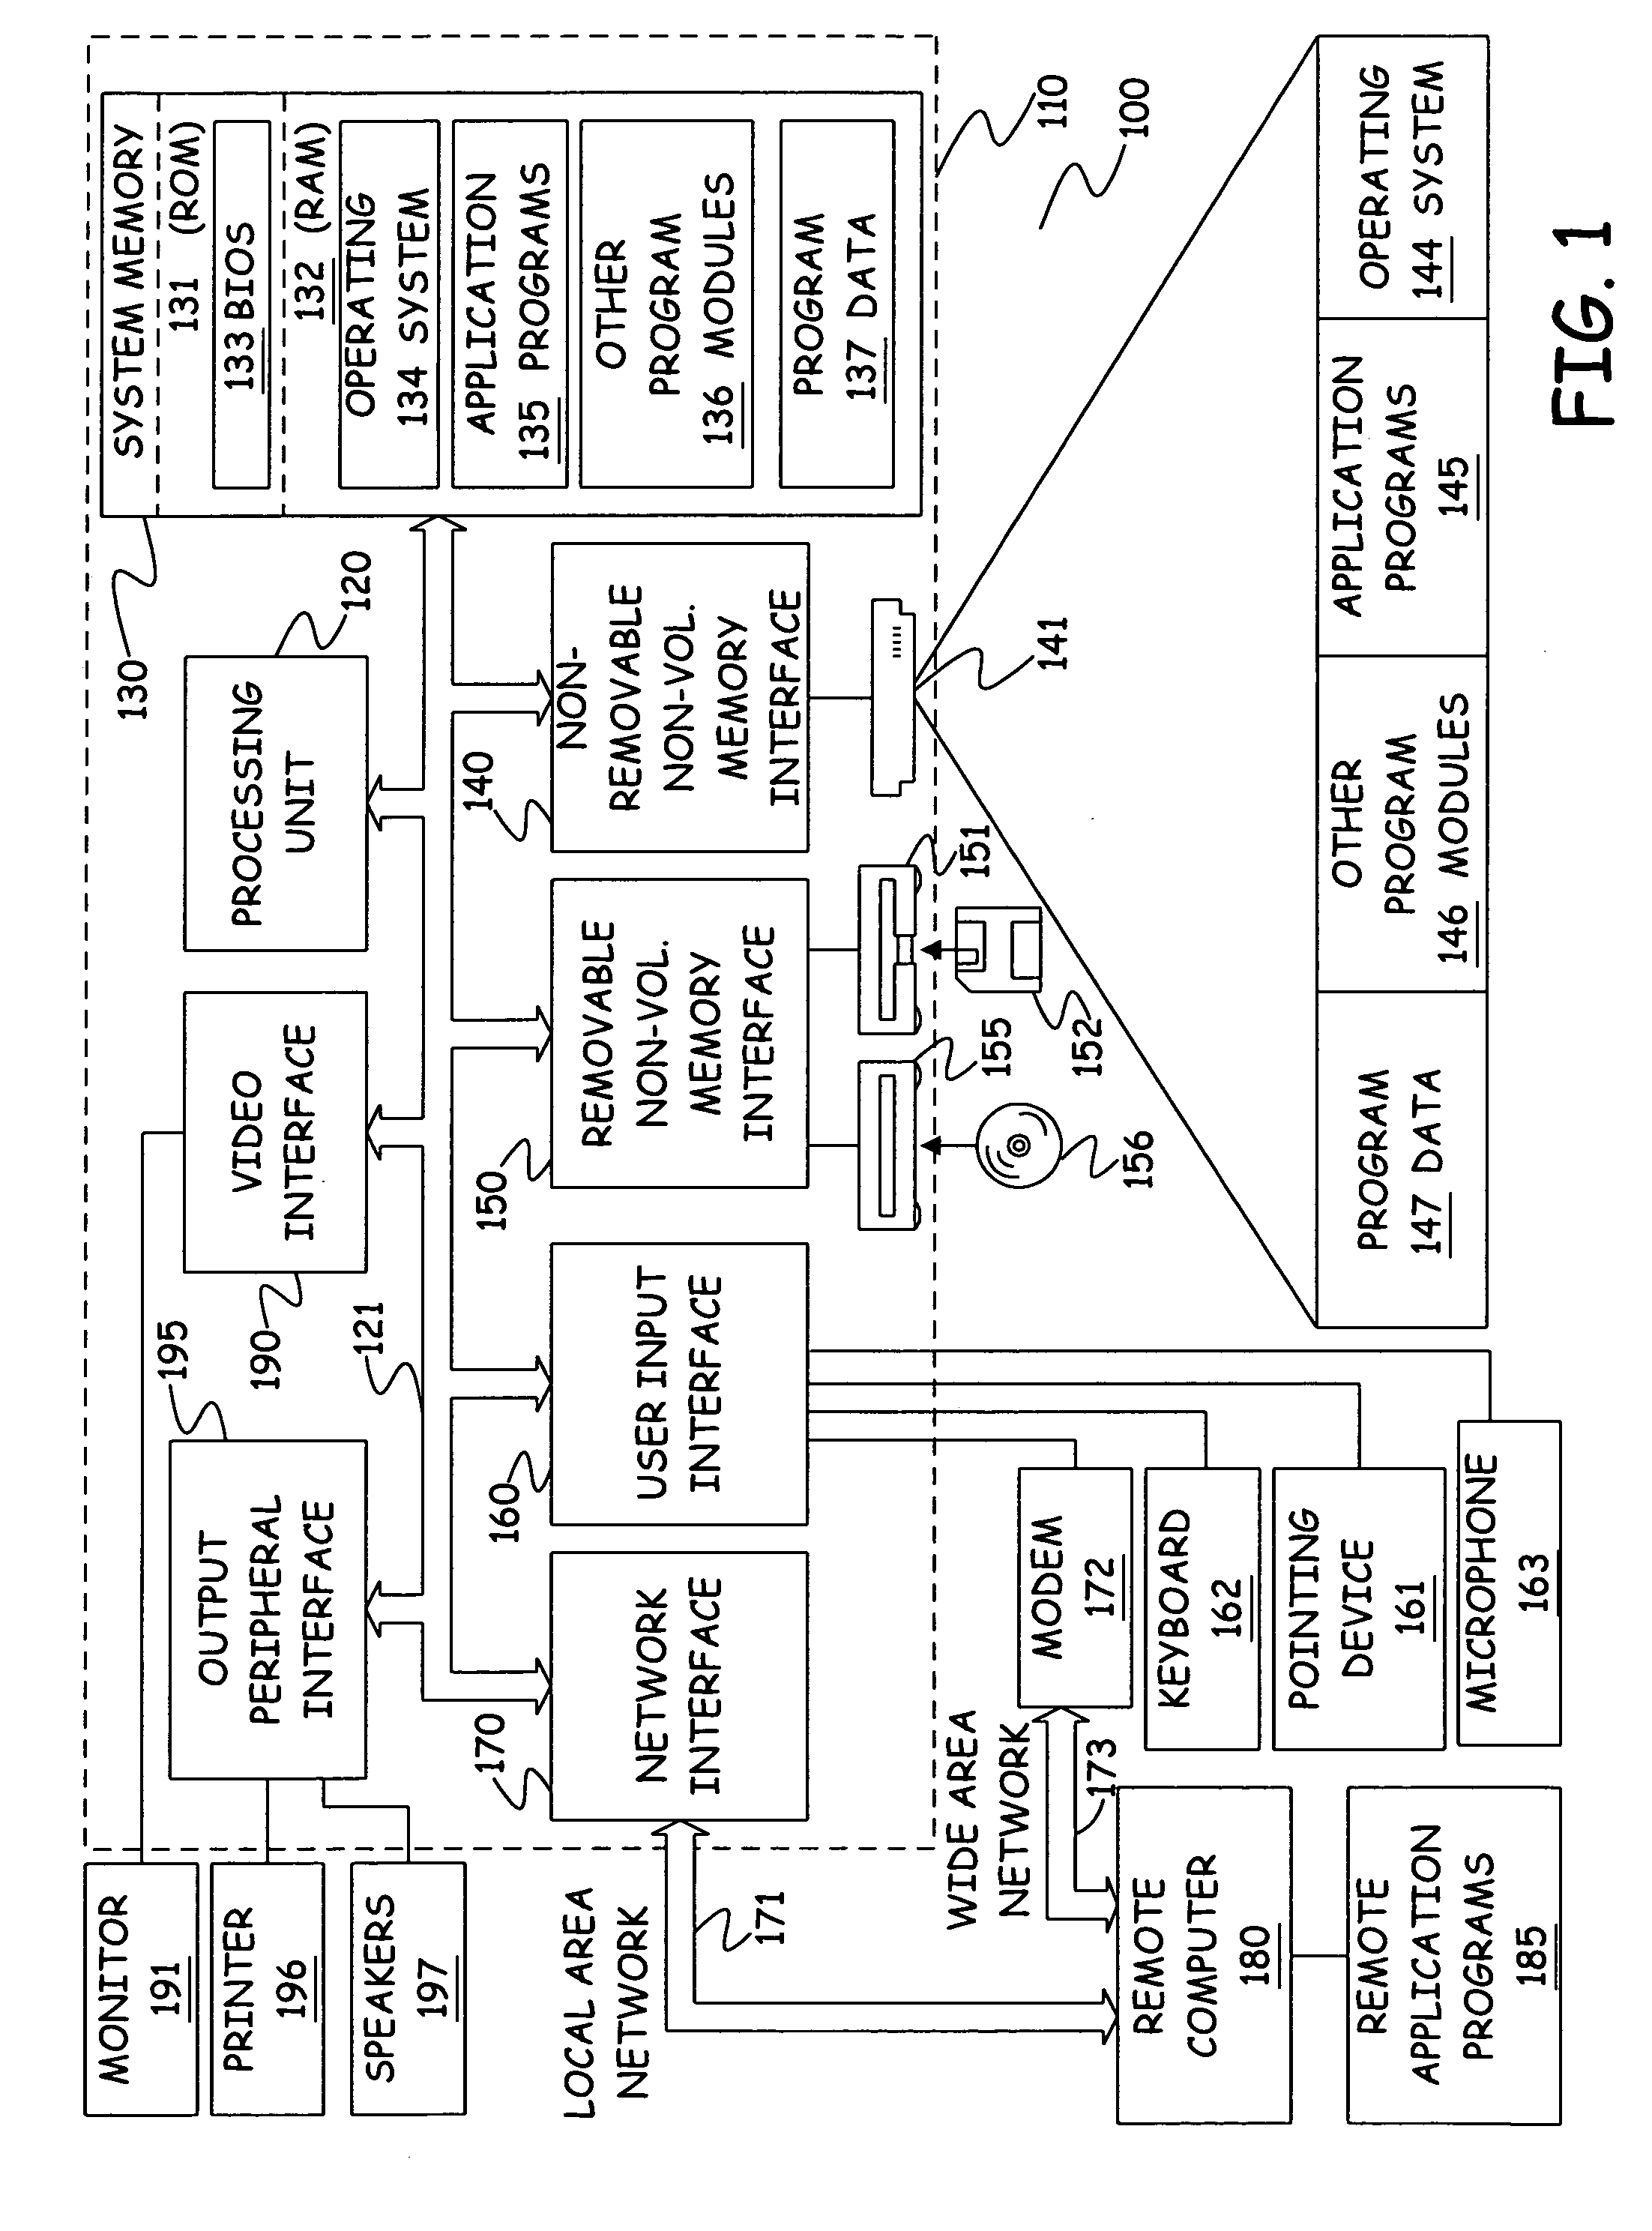 Method and apparatus for analysis and decomposition of classifier data anomalies